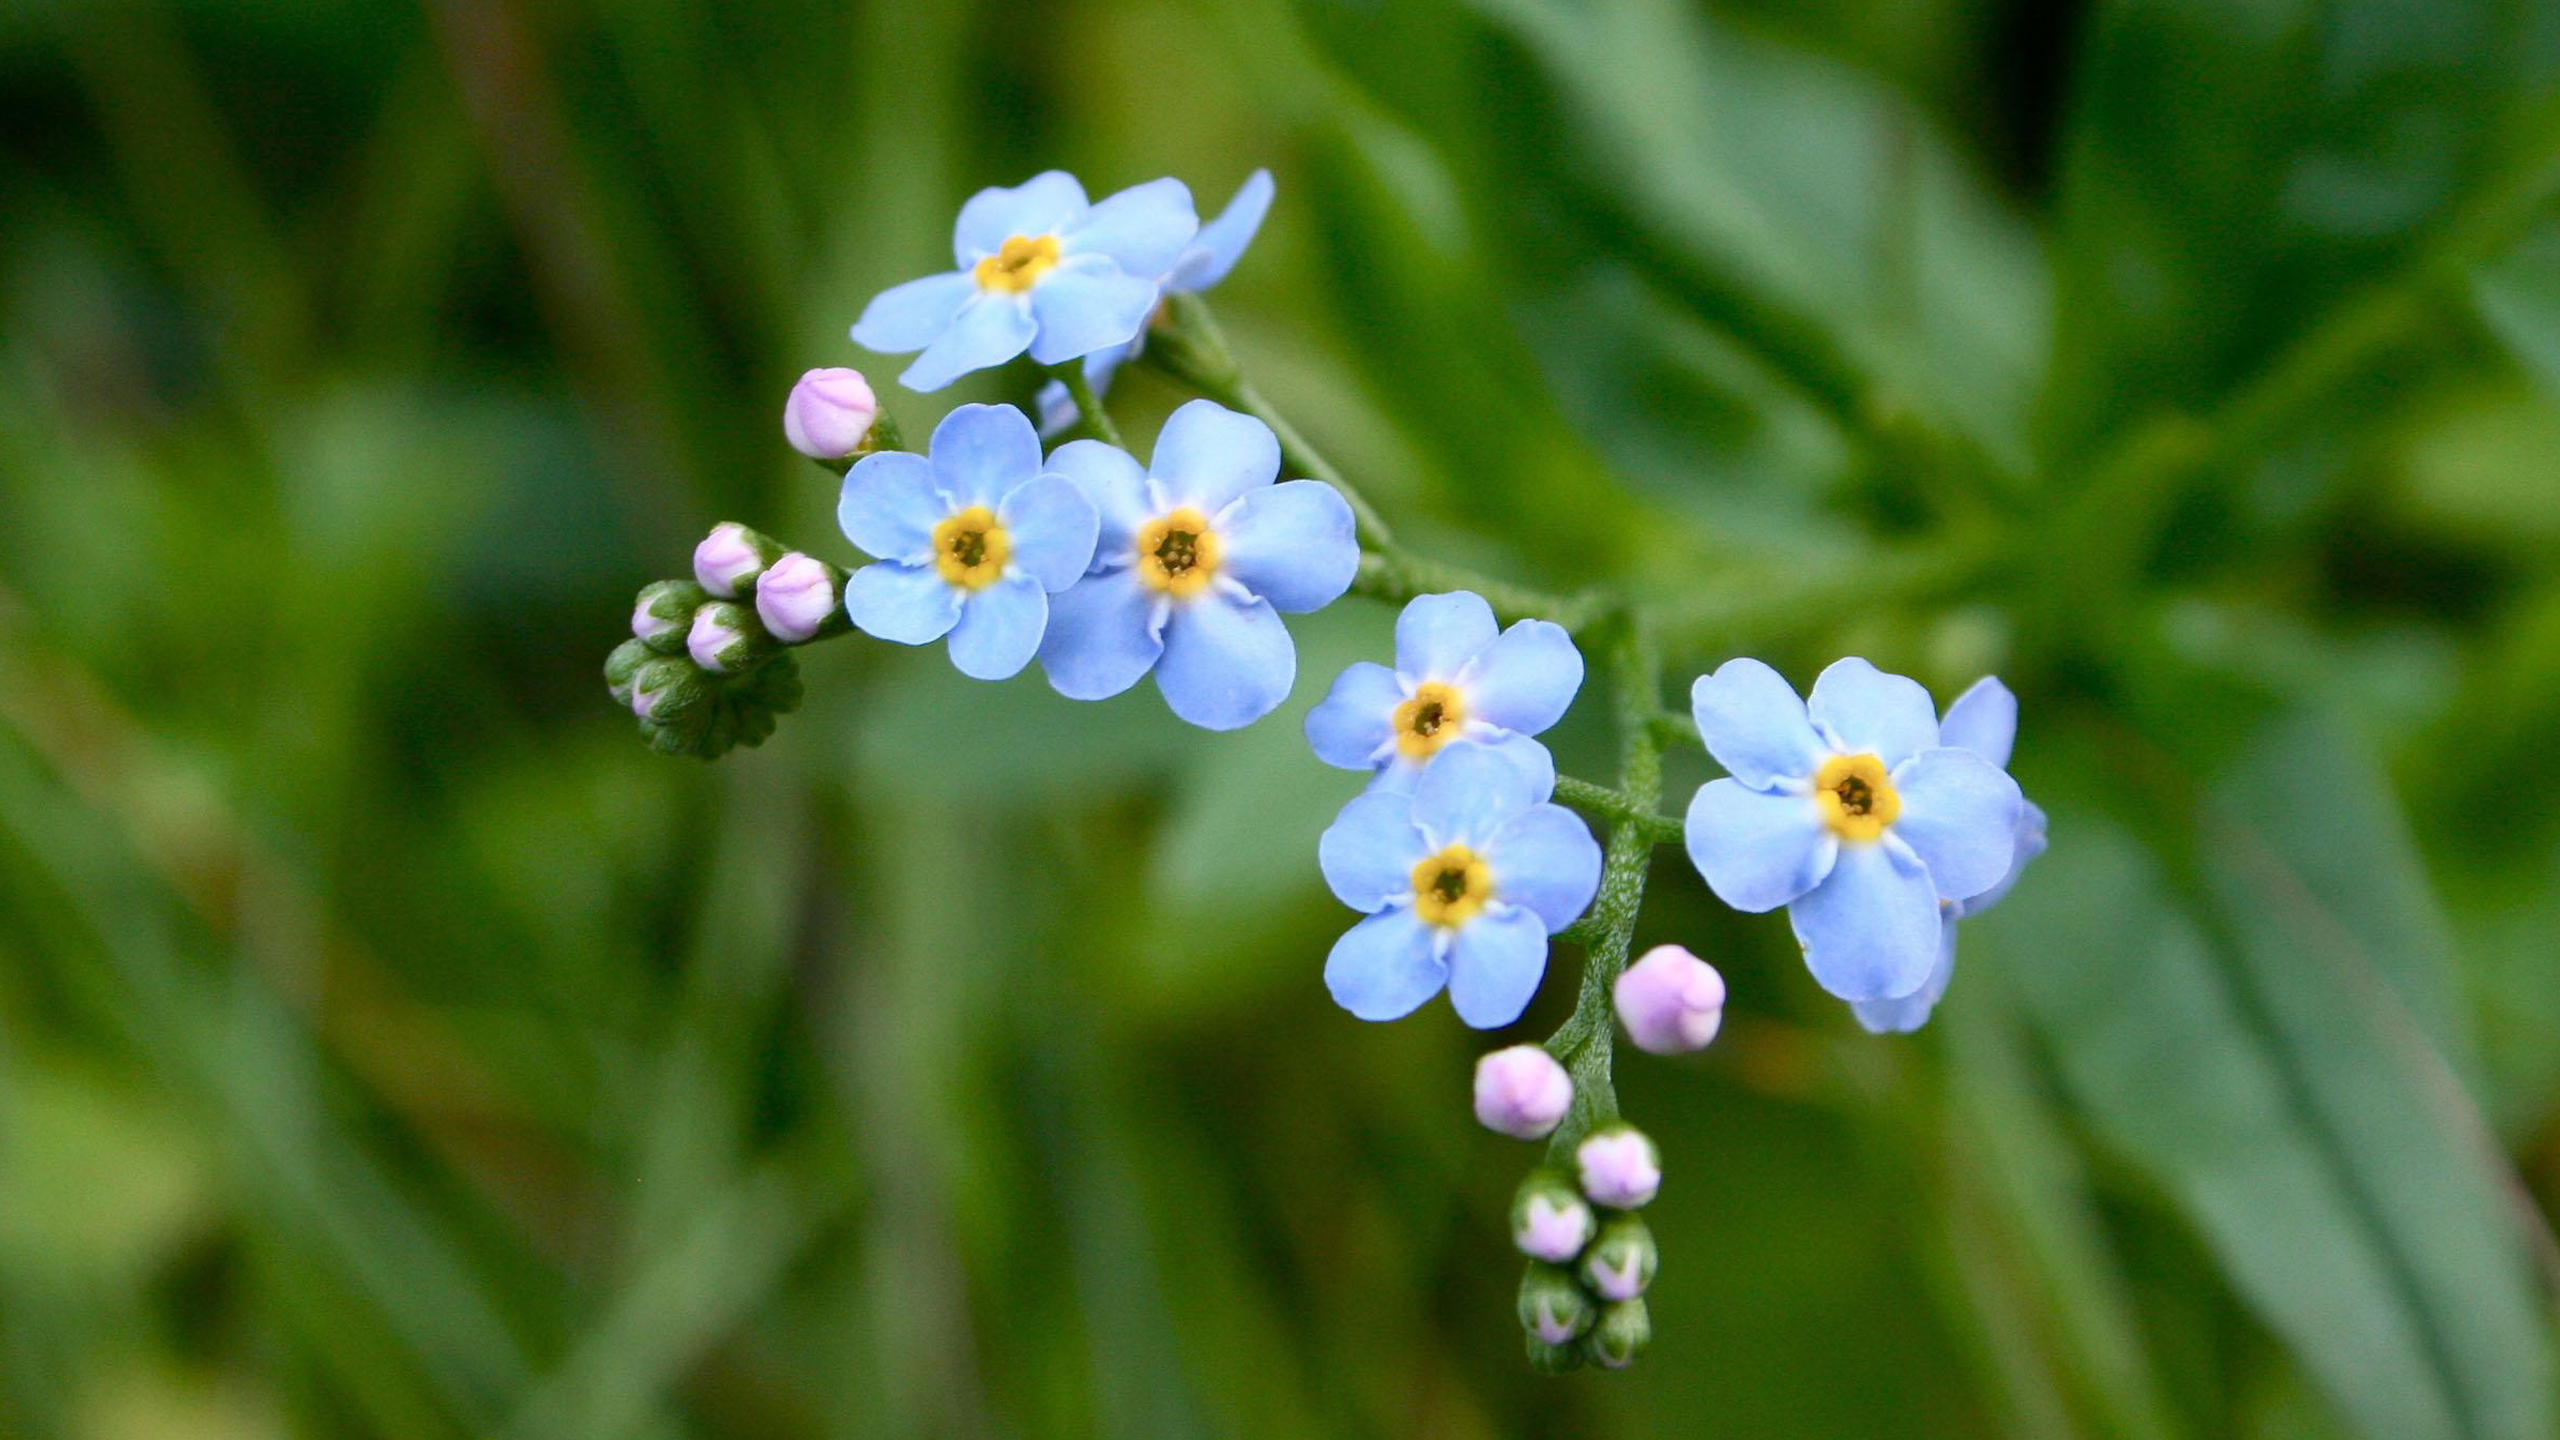 Tiny Flower Wallpaper with Forget Me Not Flower - HD Wallpapers | Wallpapers Download | High